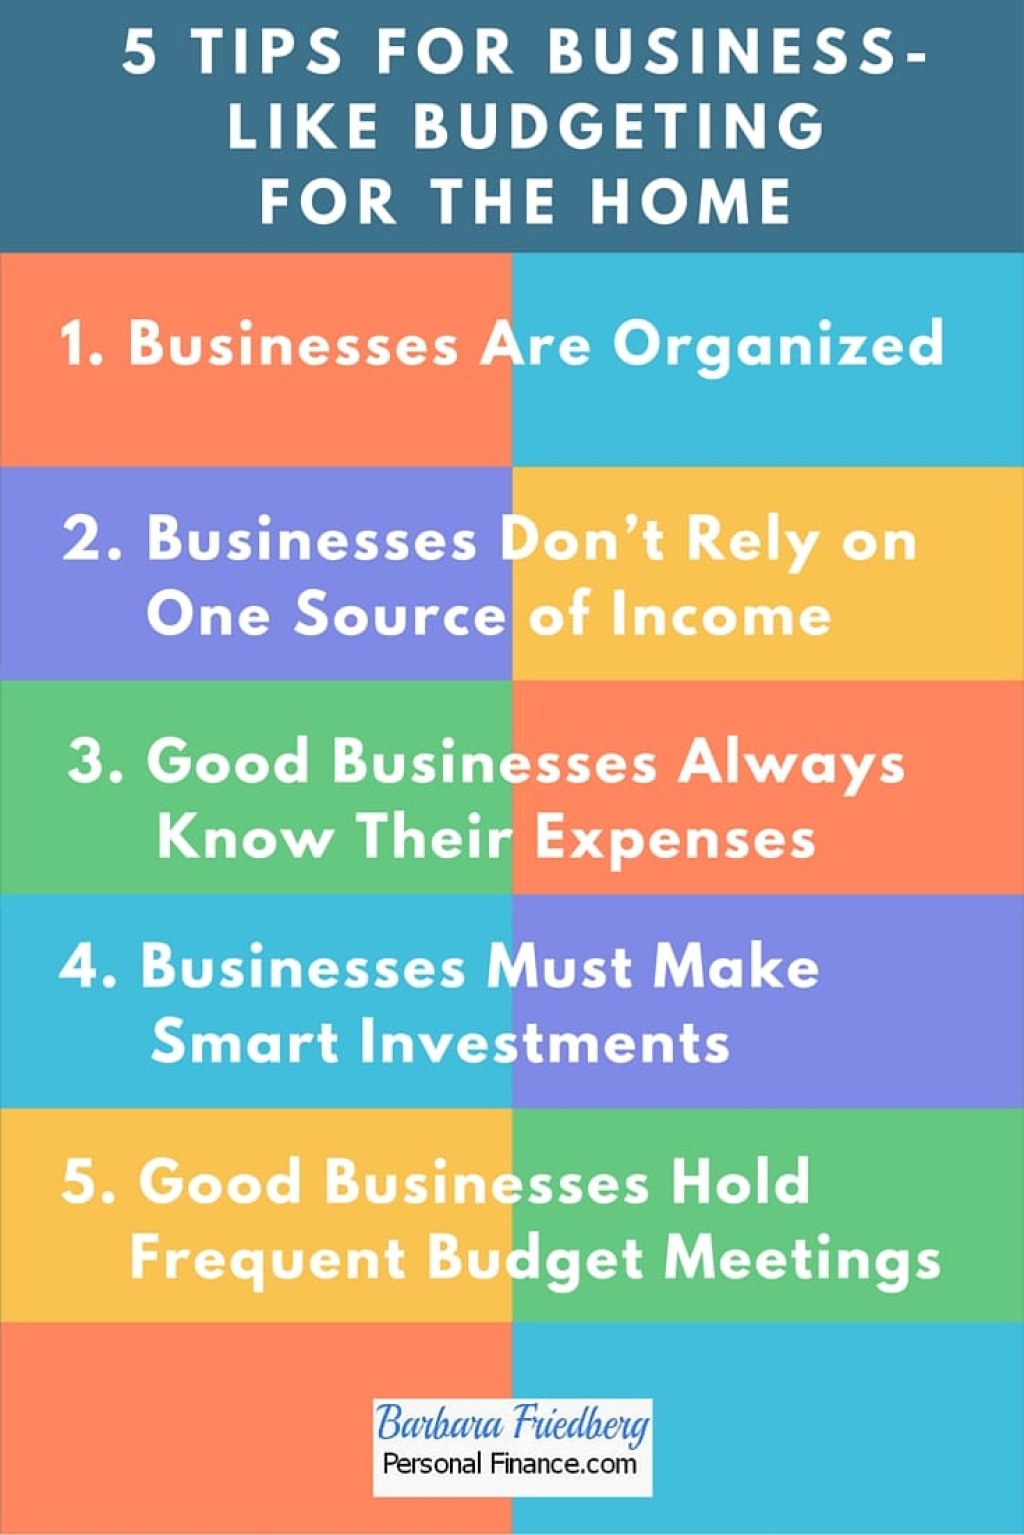 5 budgeting tips for business - Tips for Business-Like Budgeting for the Home